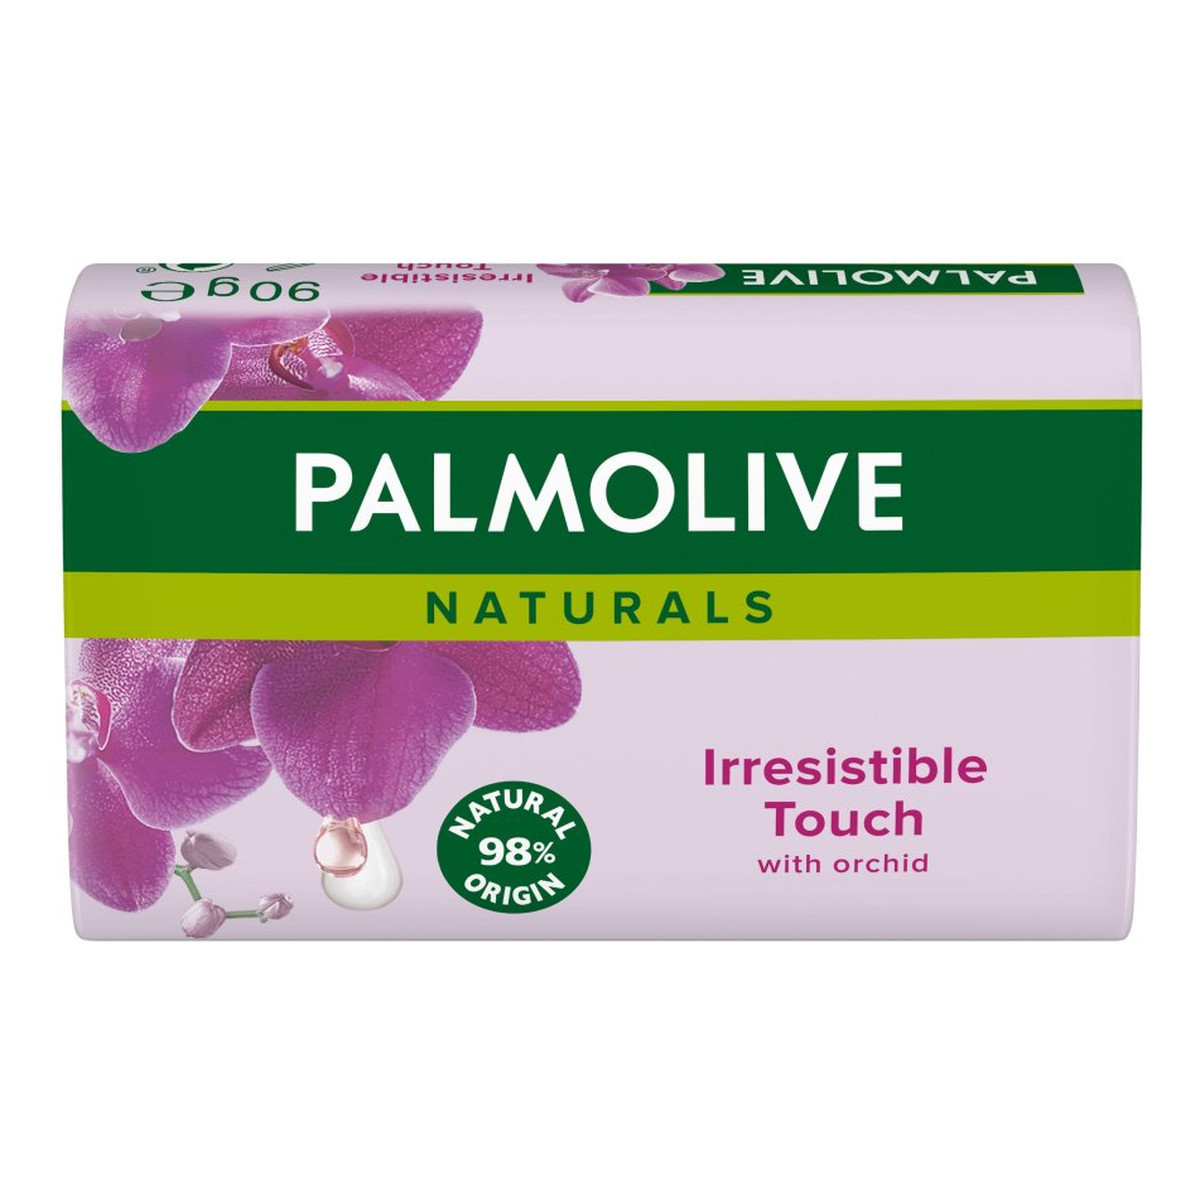 Palmolive Naturals Irresistible Touch Mydło toaletowe 90g